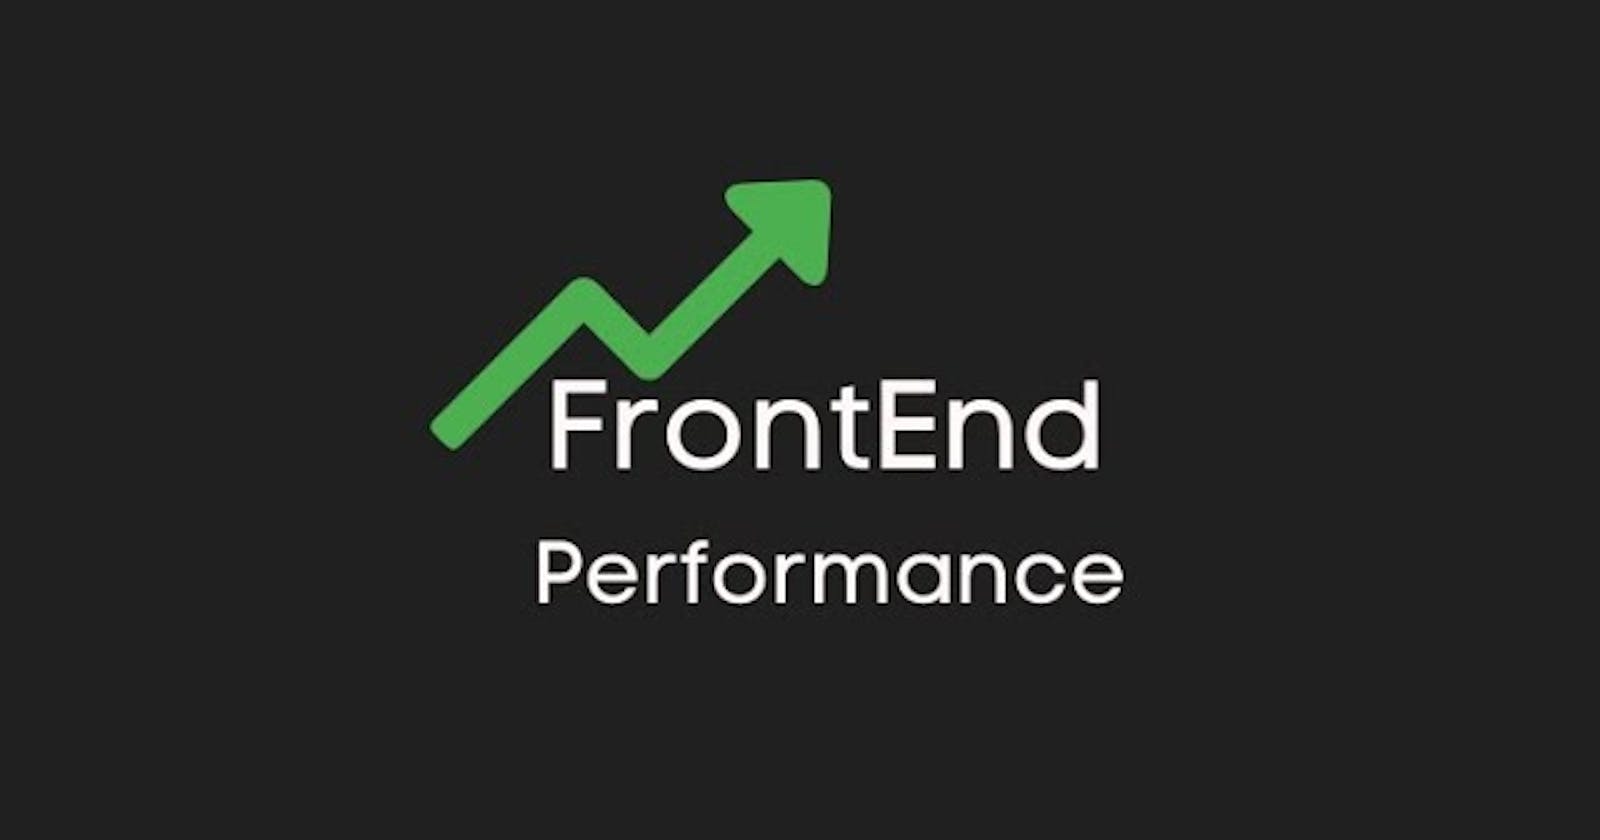 How to Increase Frontend Application Performance Built on Angular?